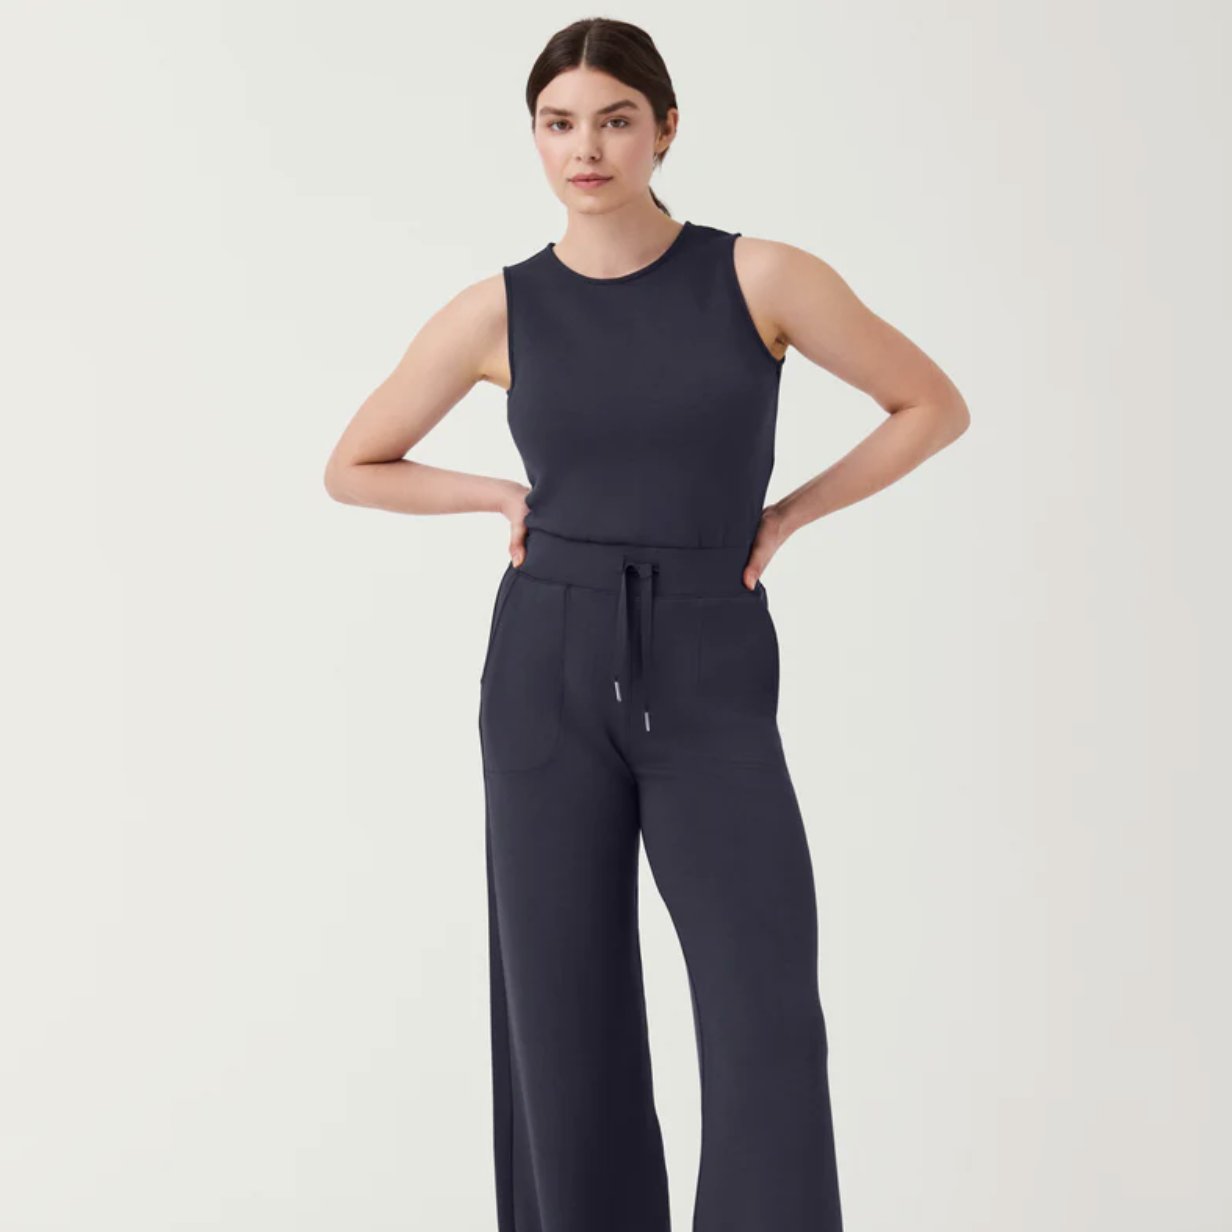 This Spanx AirEssentials Set Is One Of Oprah's Favorite, 53% OFF